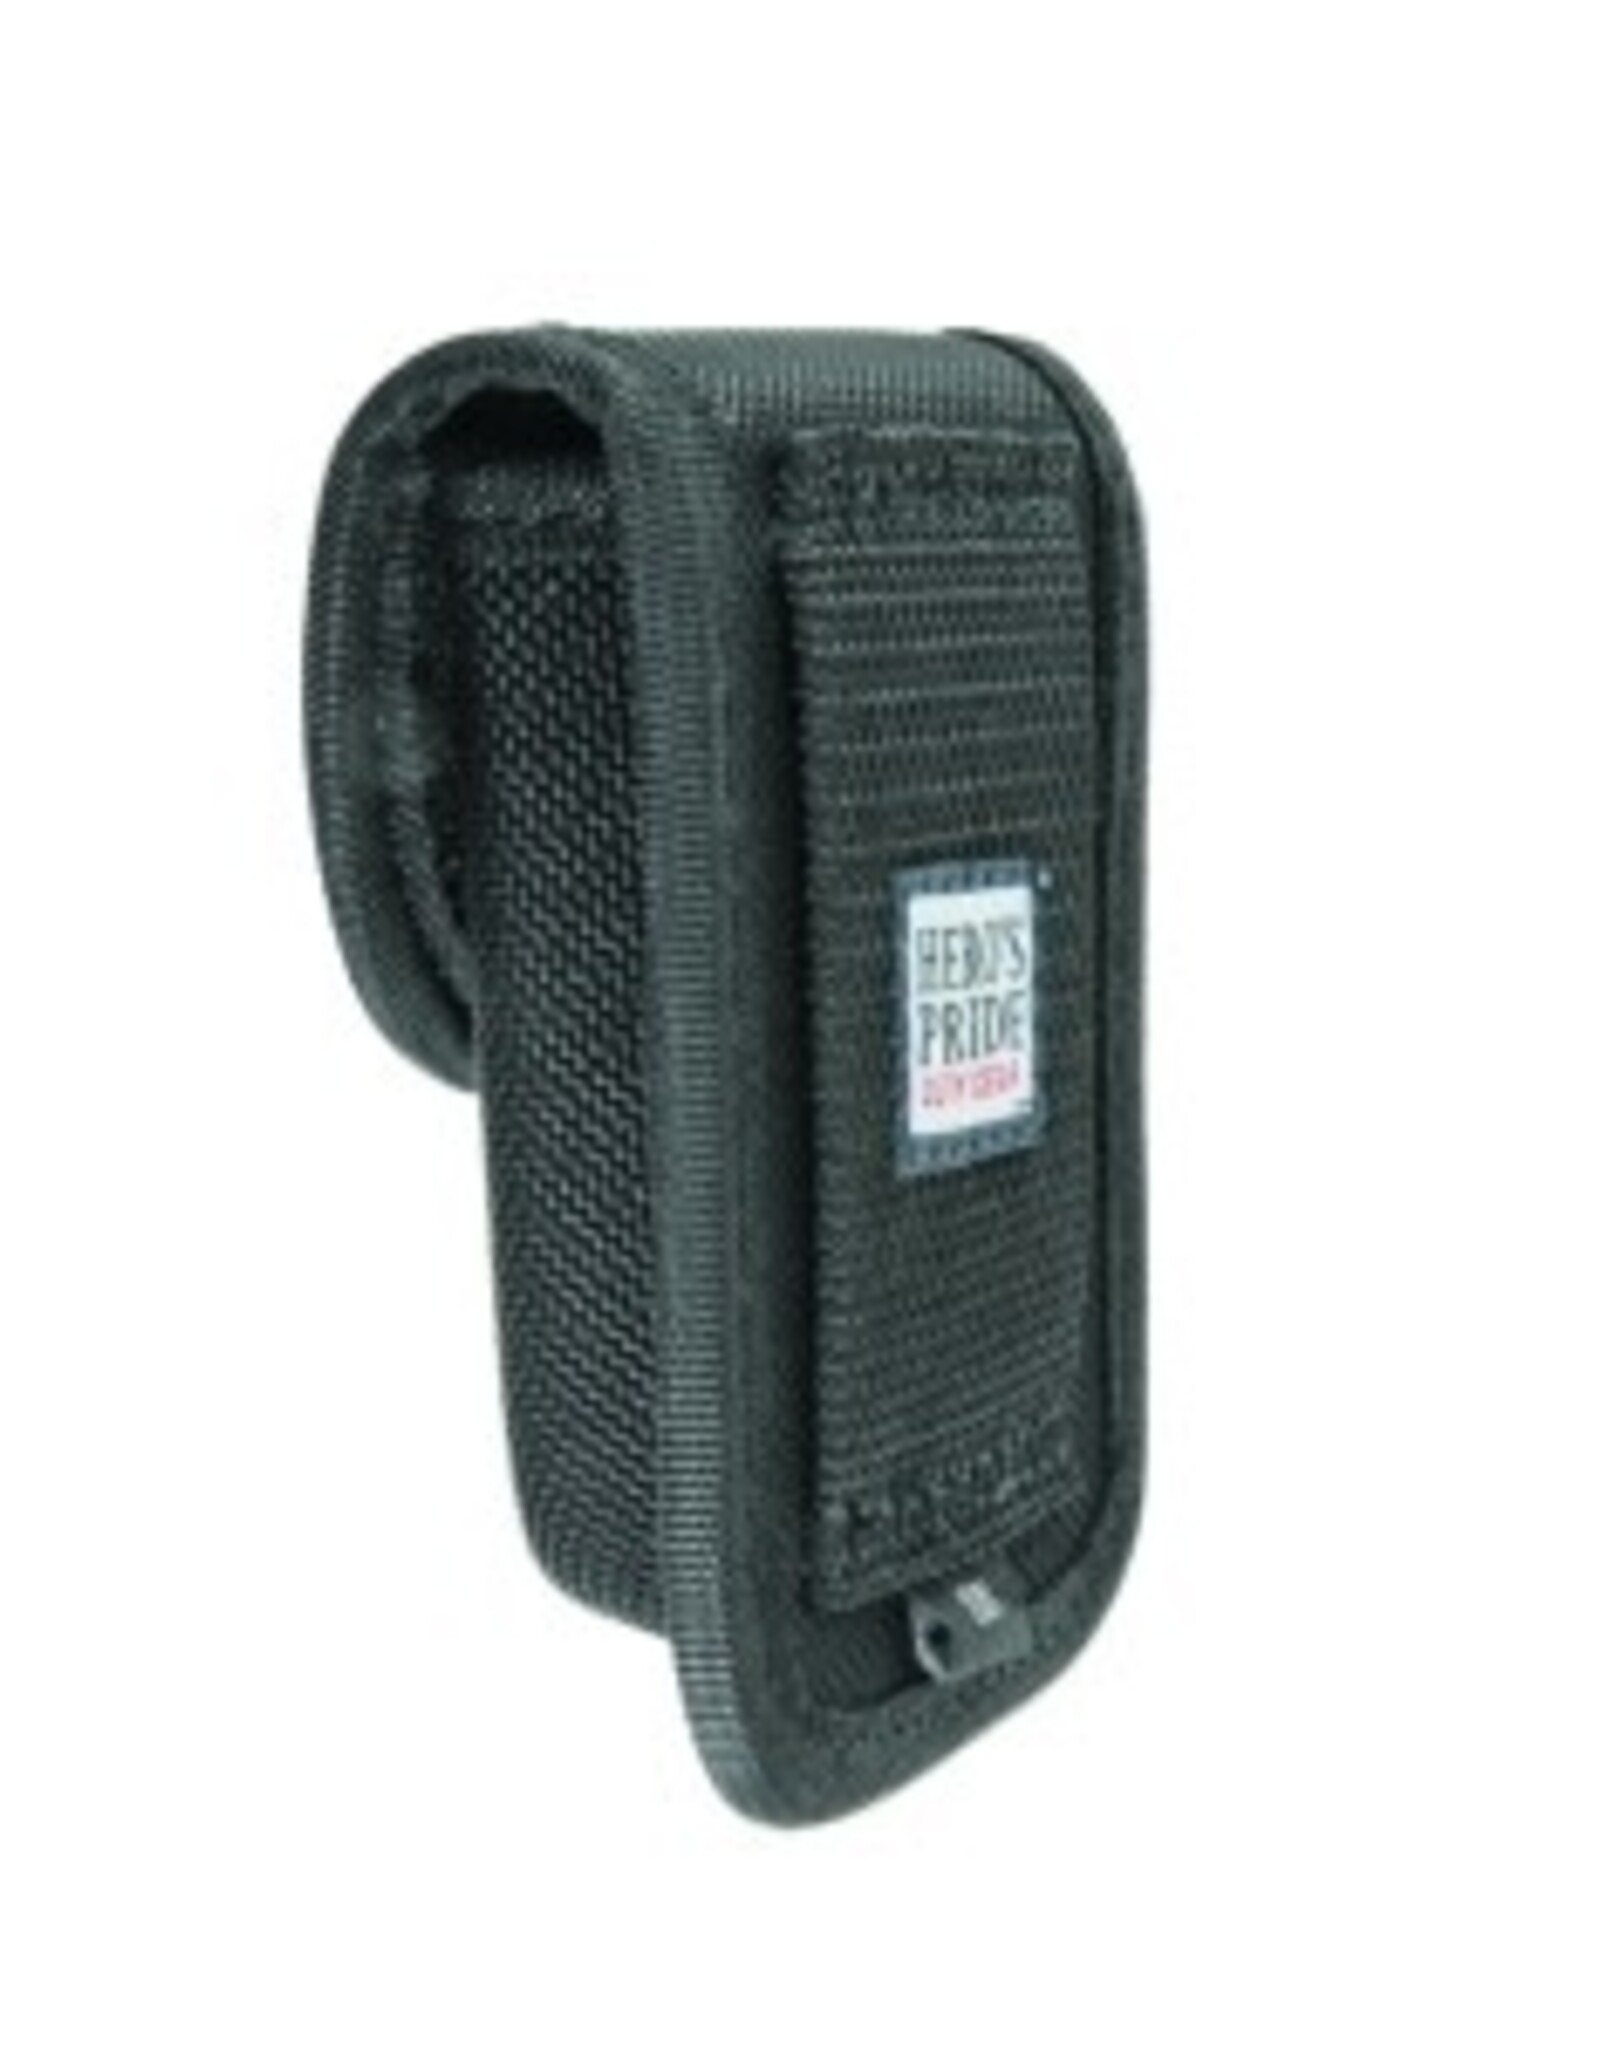 Hero's Pride Pager & Glove Pouch - Universal